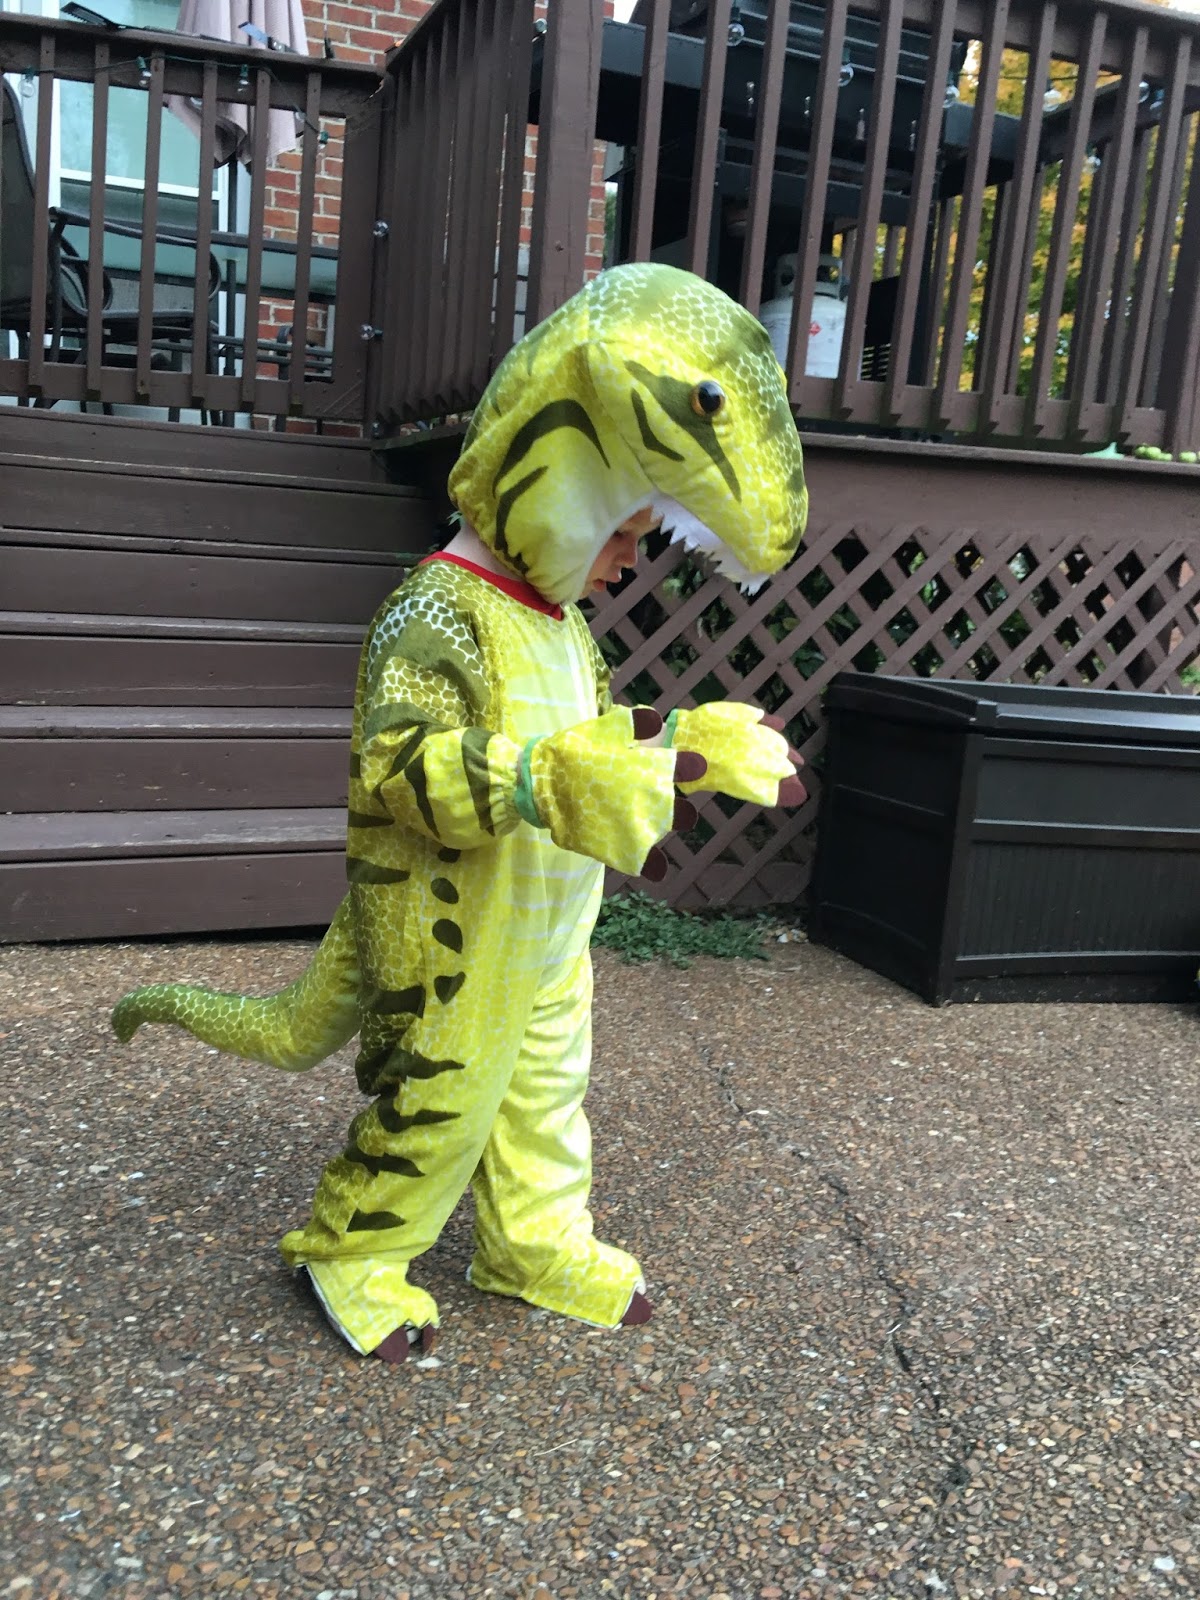 City to South: JURASSIC PARK FAMILY HALLOWEEN COSTUME